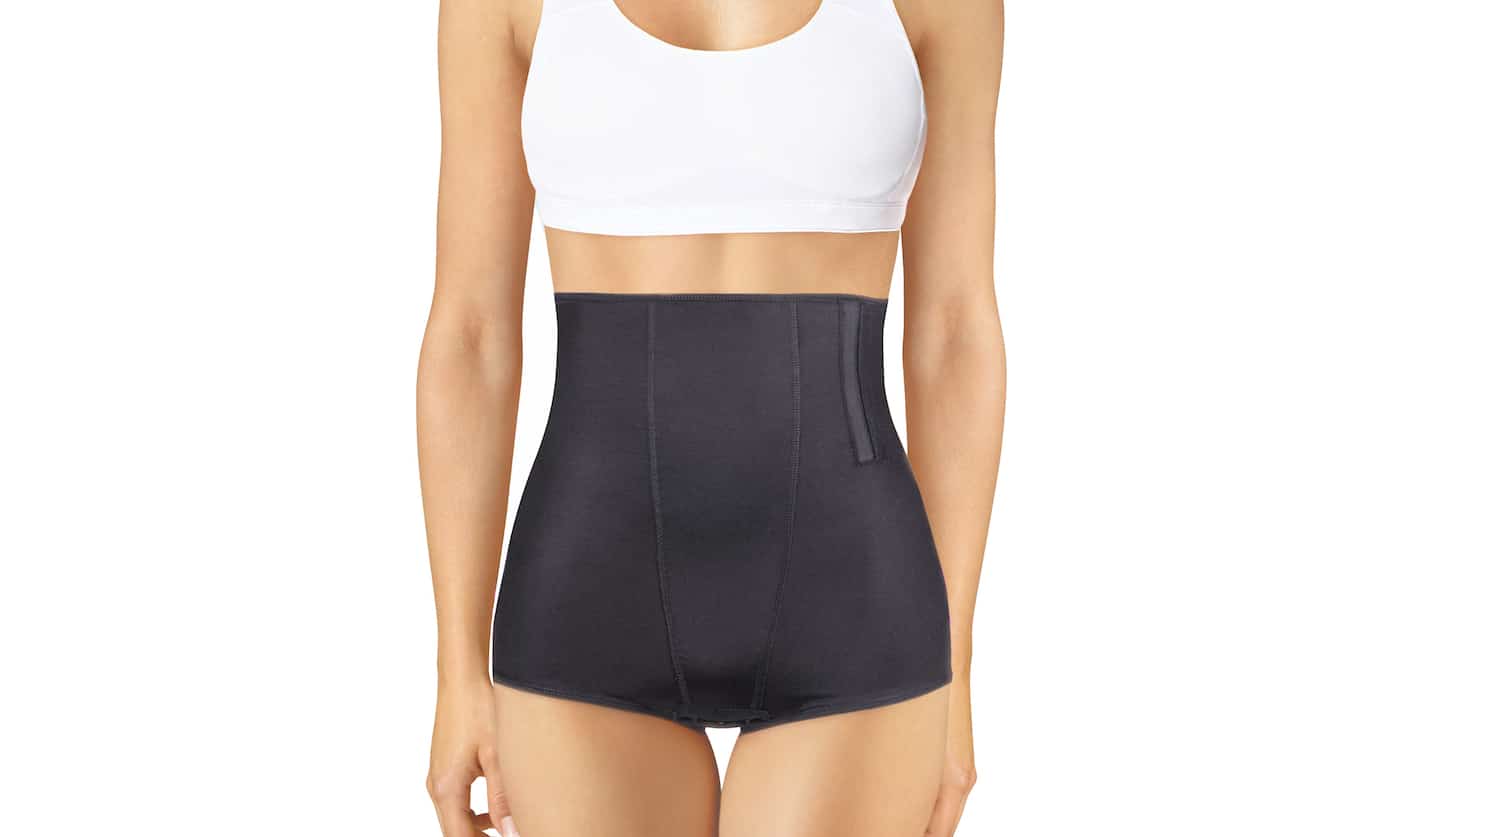 https://www.costhetics.com.au/wp-content/uploads/2020/12/yay-or-nay-compression-garments-after-lipo-.jpg